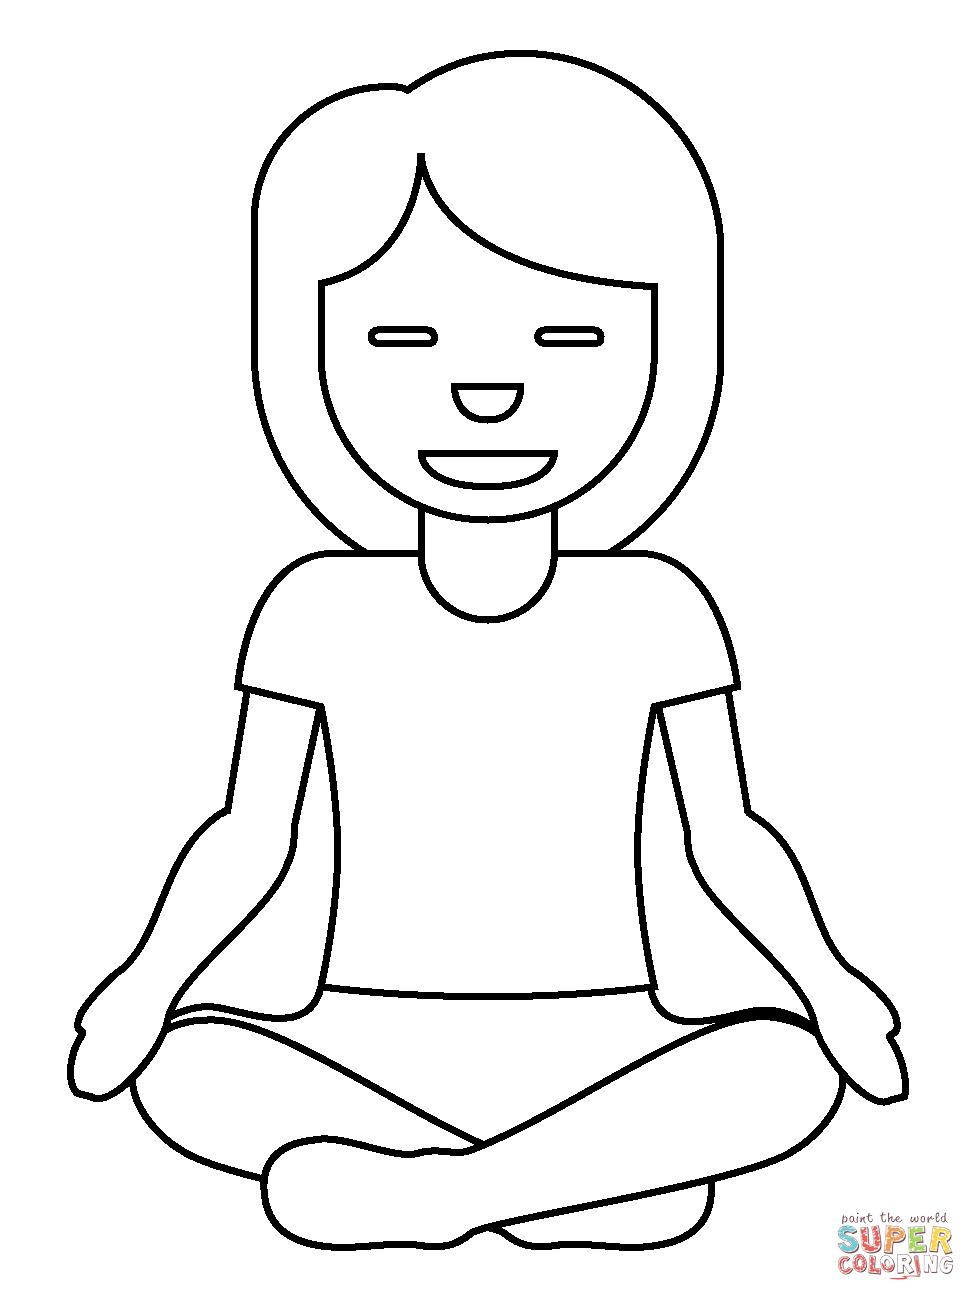 Woman in lotus position emoji coloring page free printable coloring pages